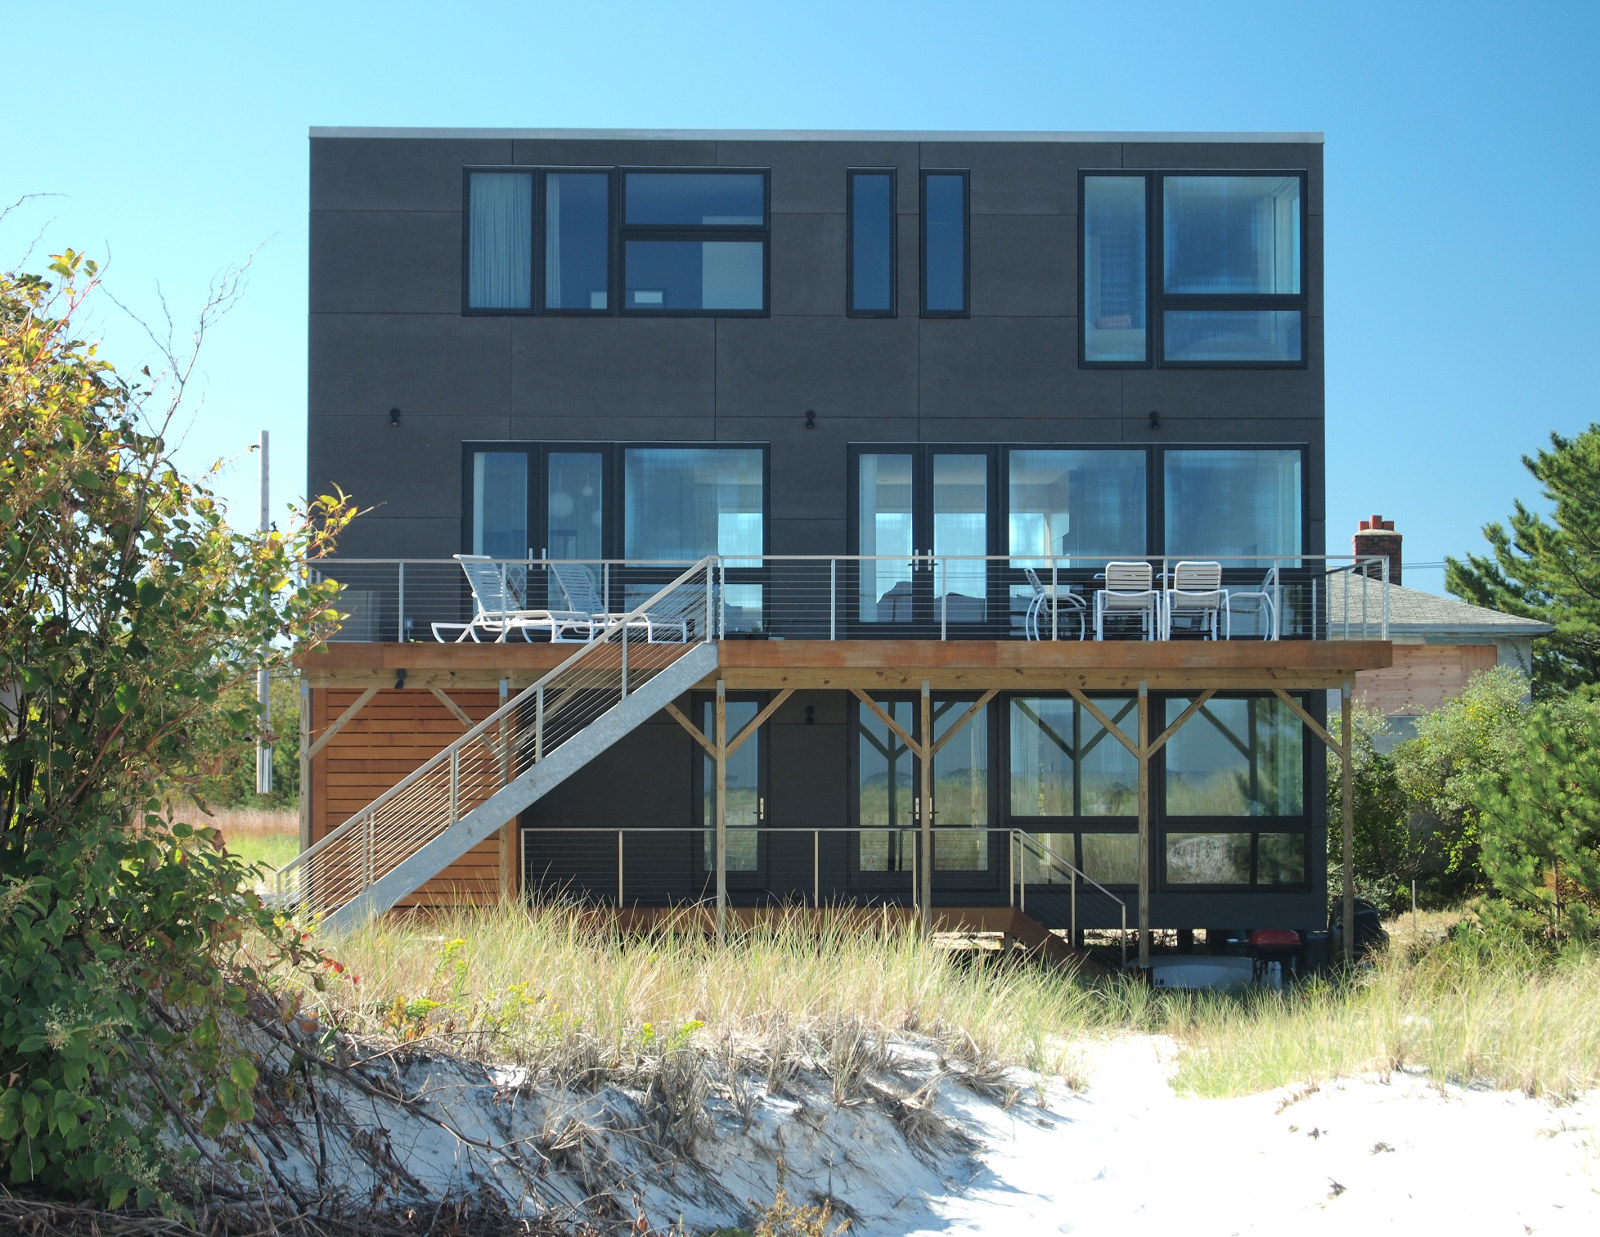 Exterior of modern house on beach in Gloucester, MA, with cement board siding and cedar deck.